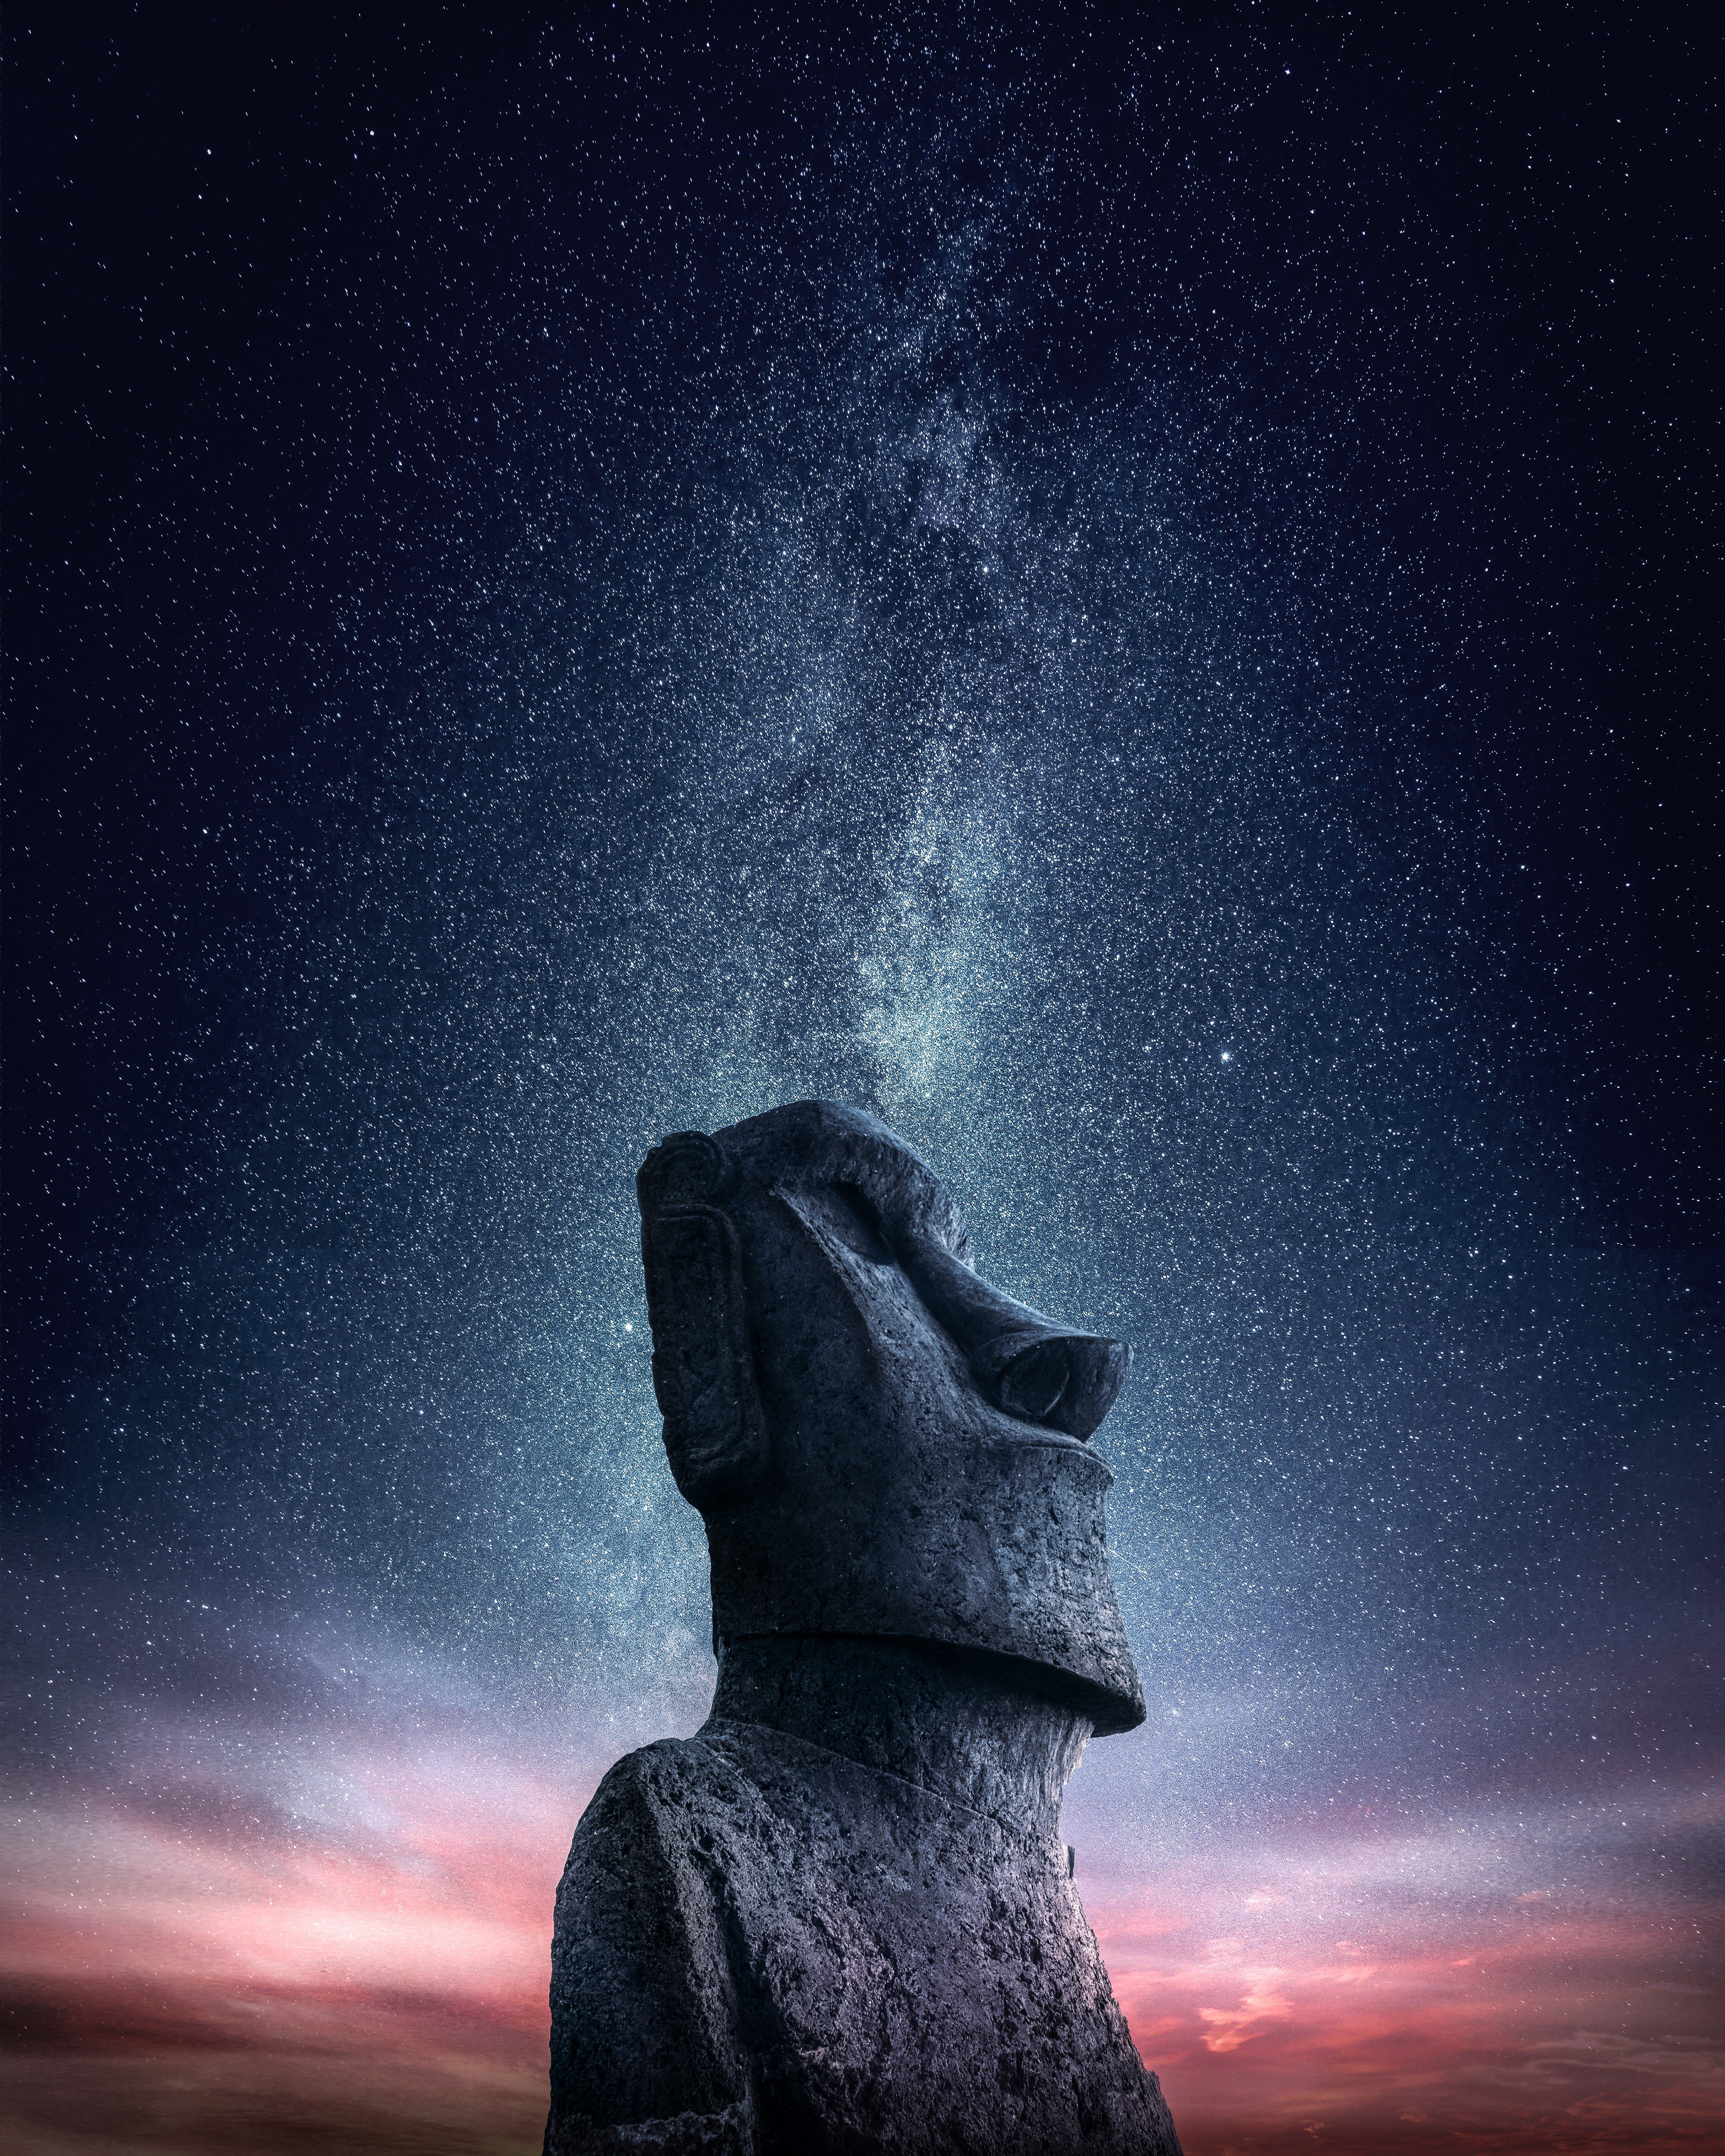 vertical wallpaper miscellaneous, moai, easter straits, miscellanea, starry sky, statue, idol, easter strow